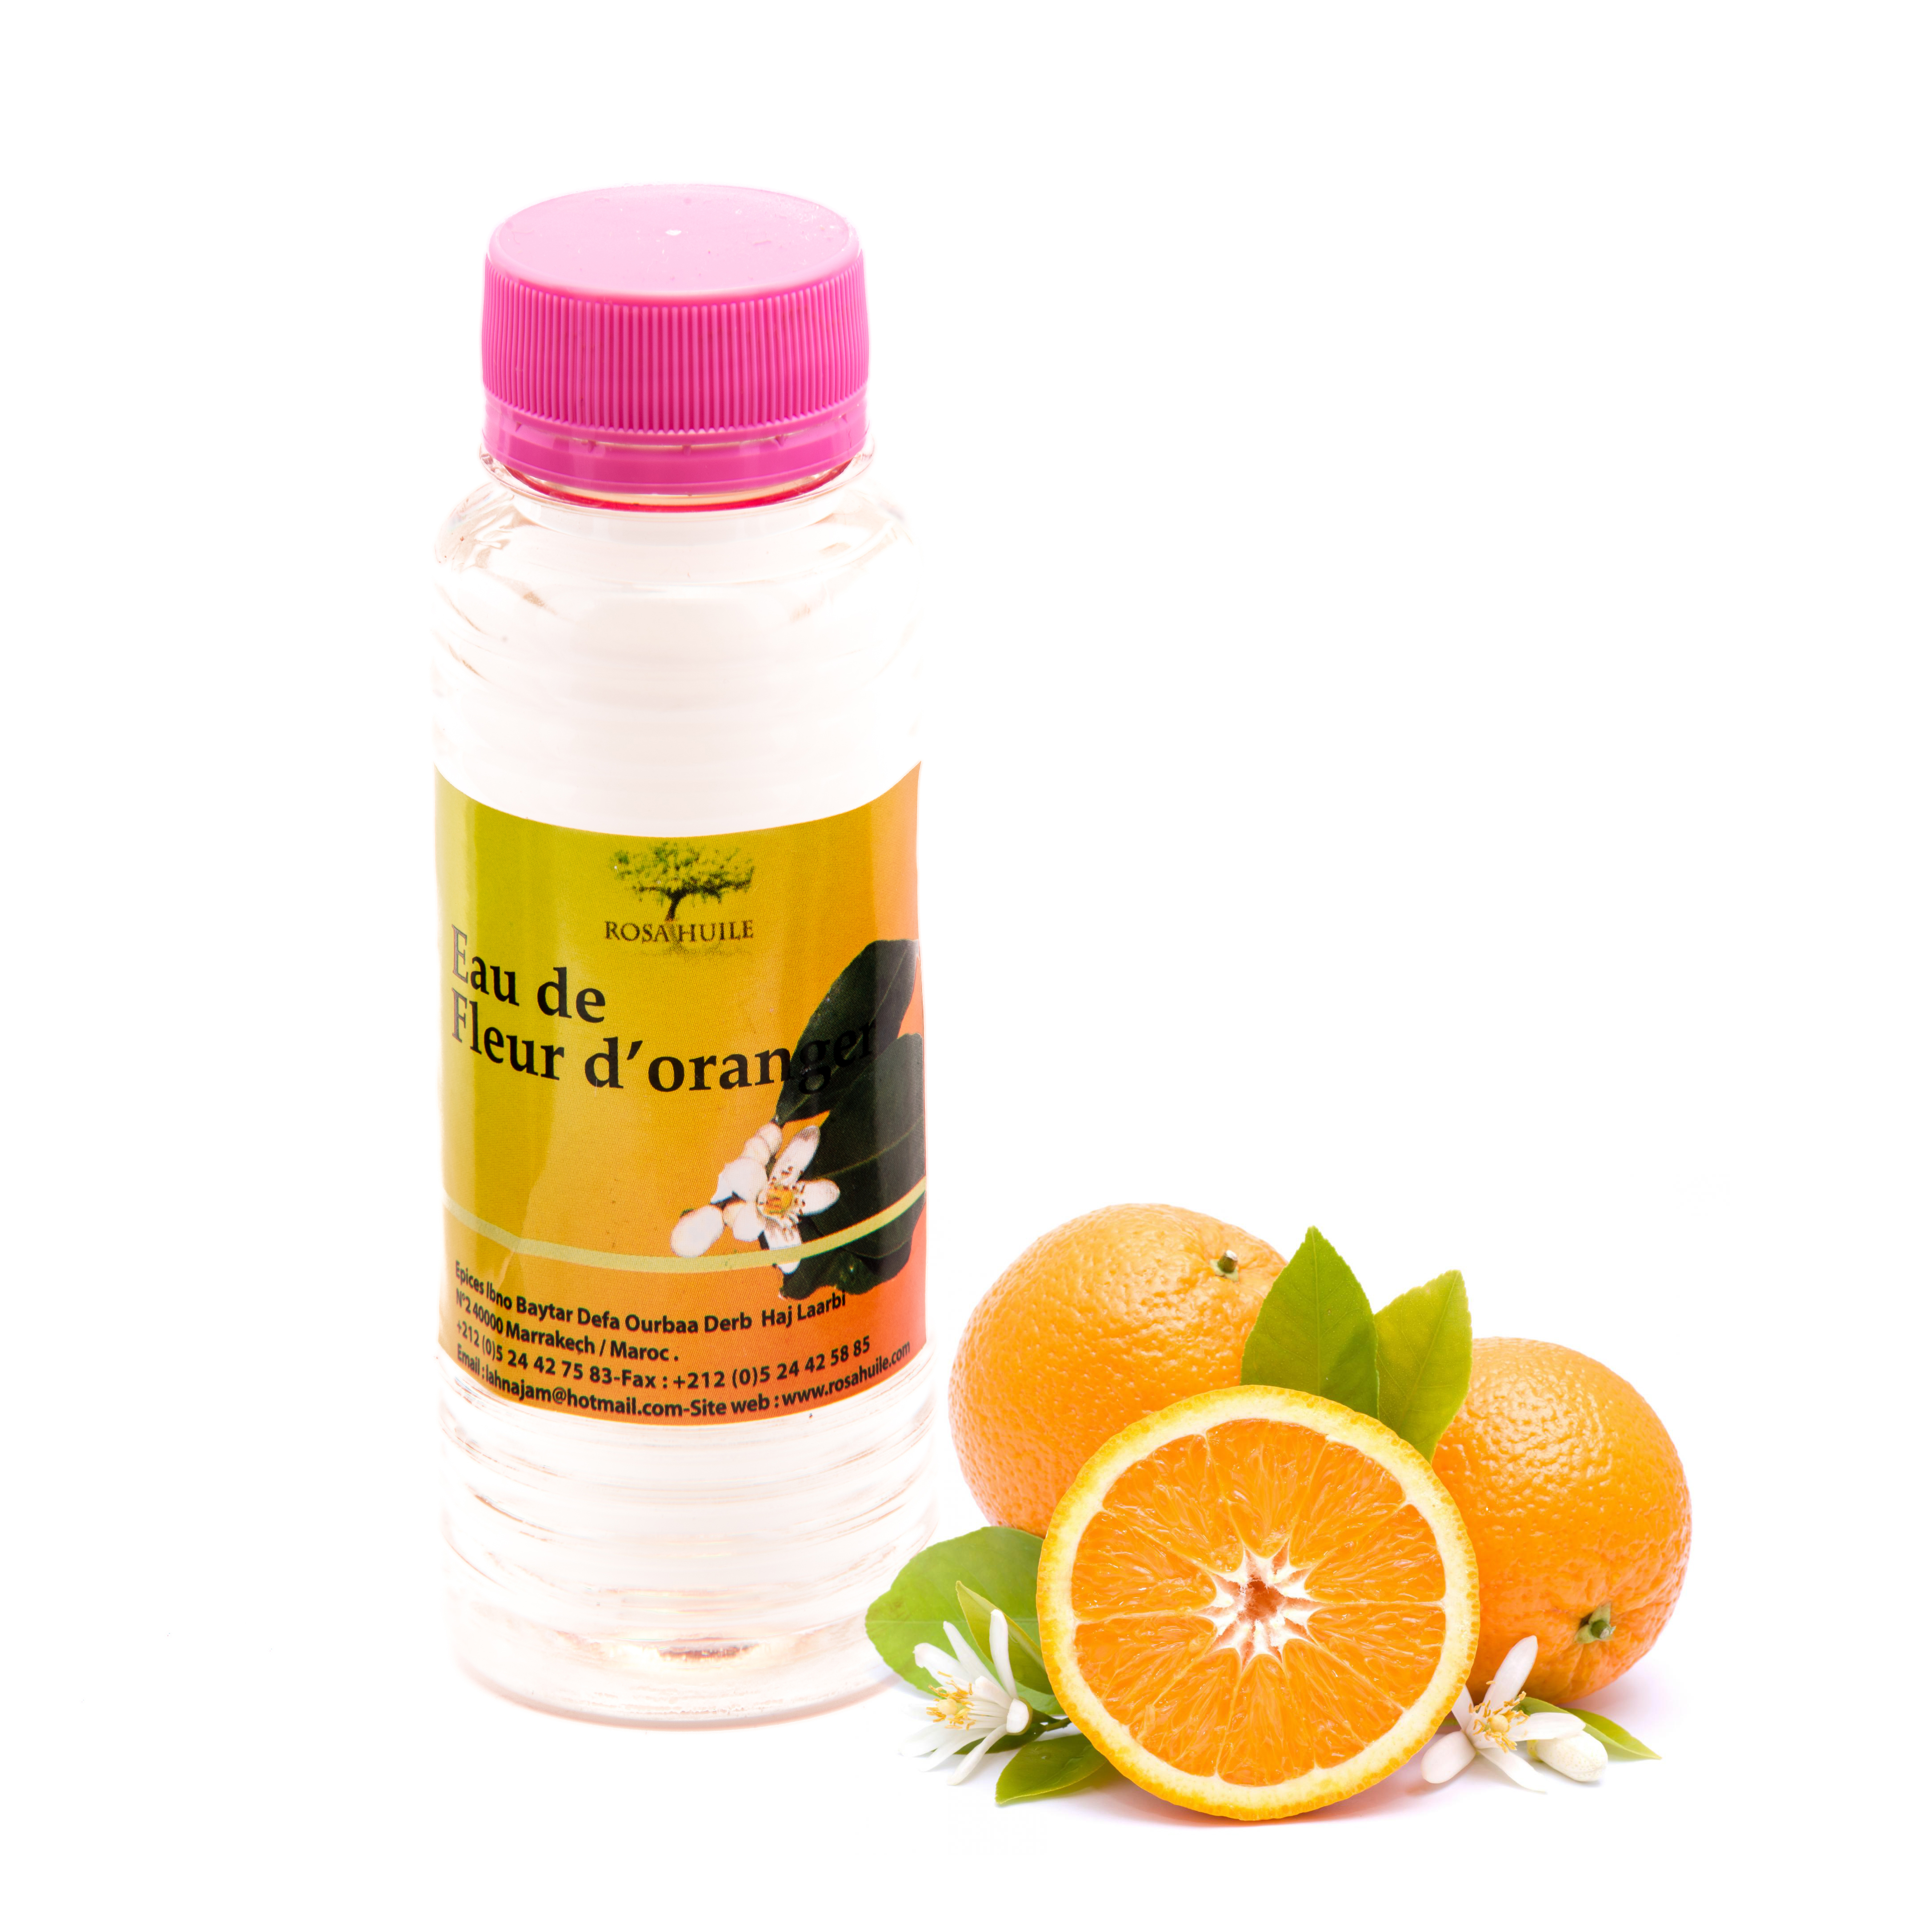 8 Beauty Benefits and Uses of ORANGE BLOSSOM WATER – Moroccan Elixir